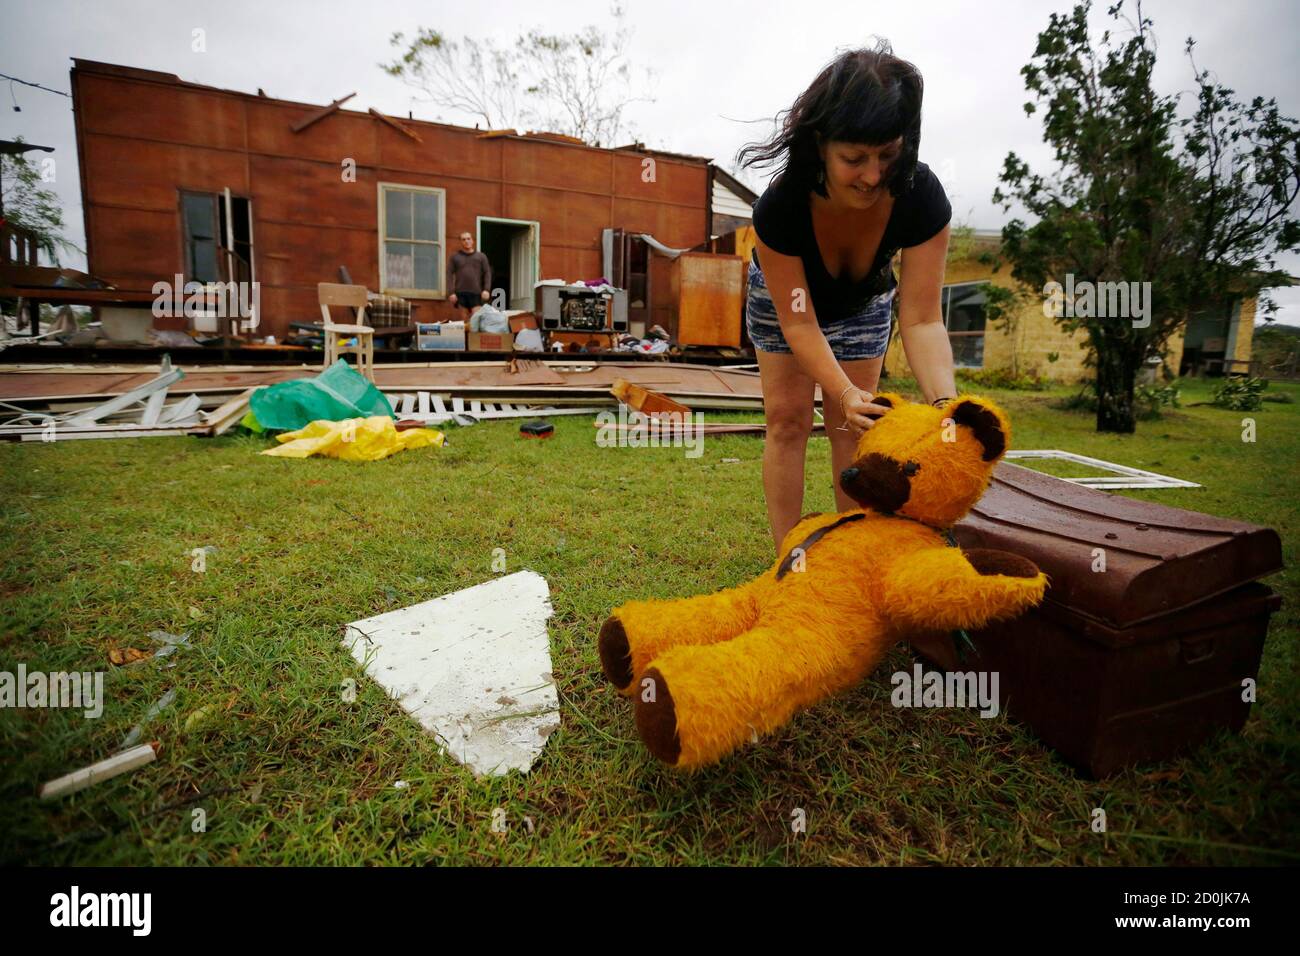 Melanie Cobb places on the ground her childhood teddy bear she retrieved from her grandmother's damaged home after Cyclone Marcia hit the coastal town of Yeppoon in northeastern Australia, February 20, 2015. Marcia slammed into northeast Australia on Friday, destroying homes, upending trees, cutting power lines and causing flash floods, while a second storm severered communications to a northern island where heavy damage was expected.    REUTERS/Jason Reed   (AUSTRALIA - Tags: ENVIRONMENT DISASTER) Stock Photo